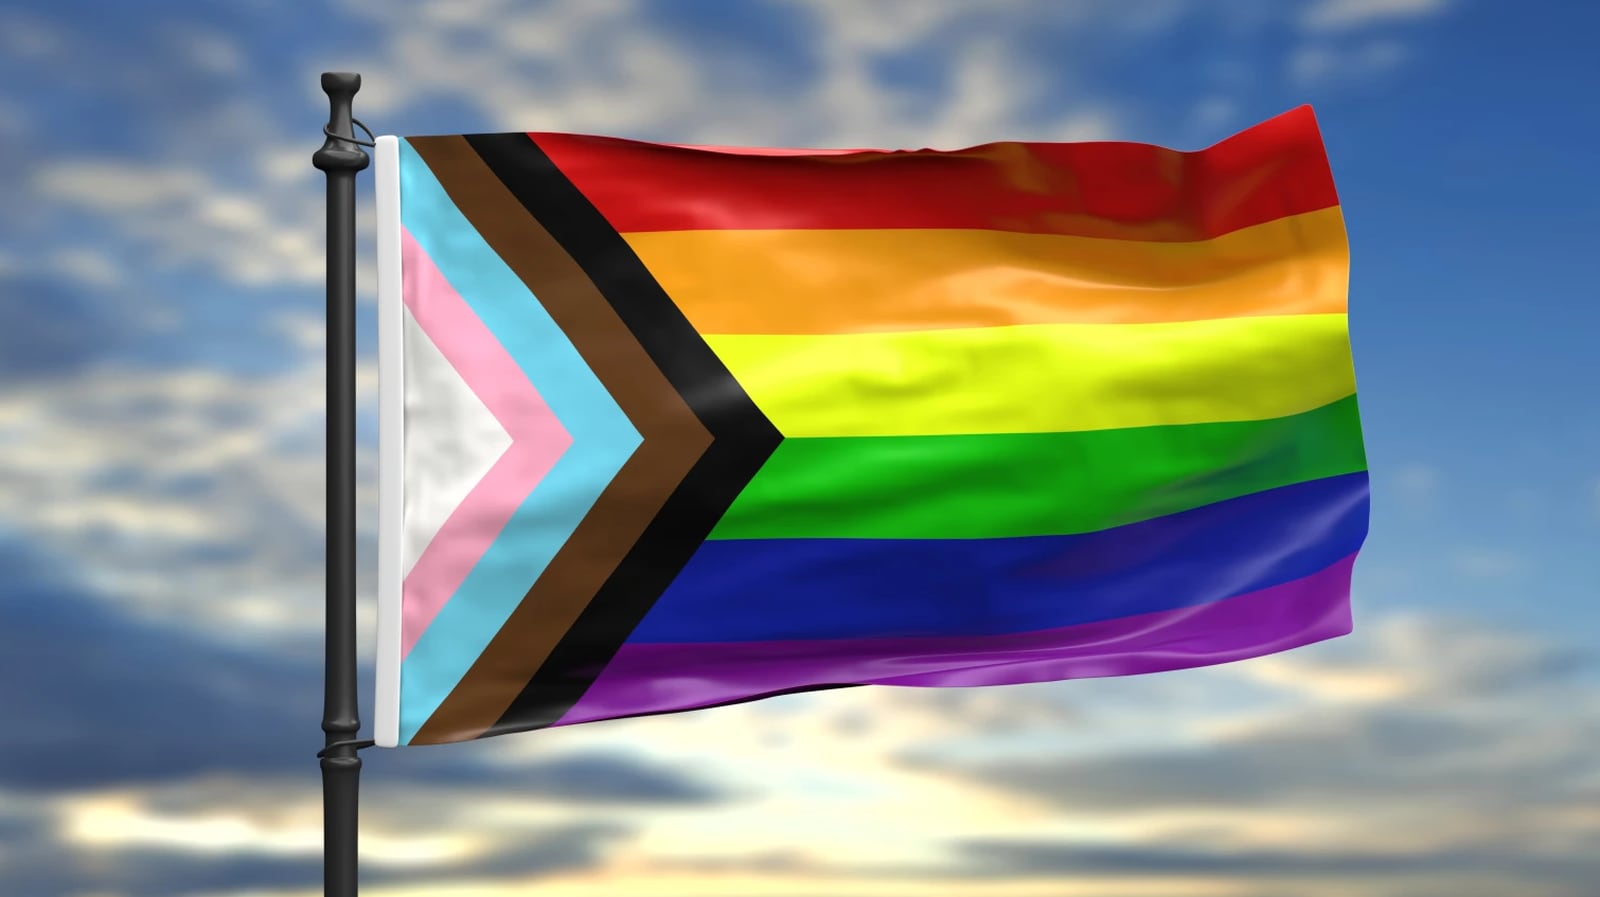 Town of Boone hosts Pride Flag raising event in honor of Pride Month